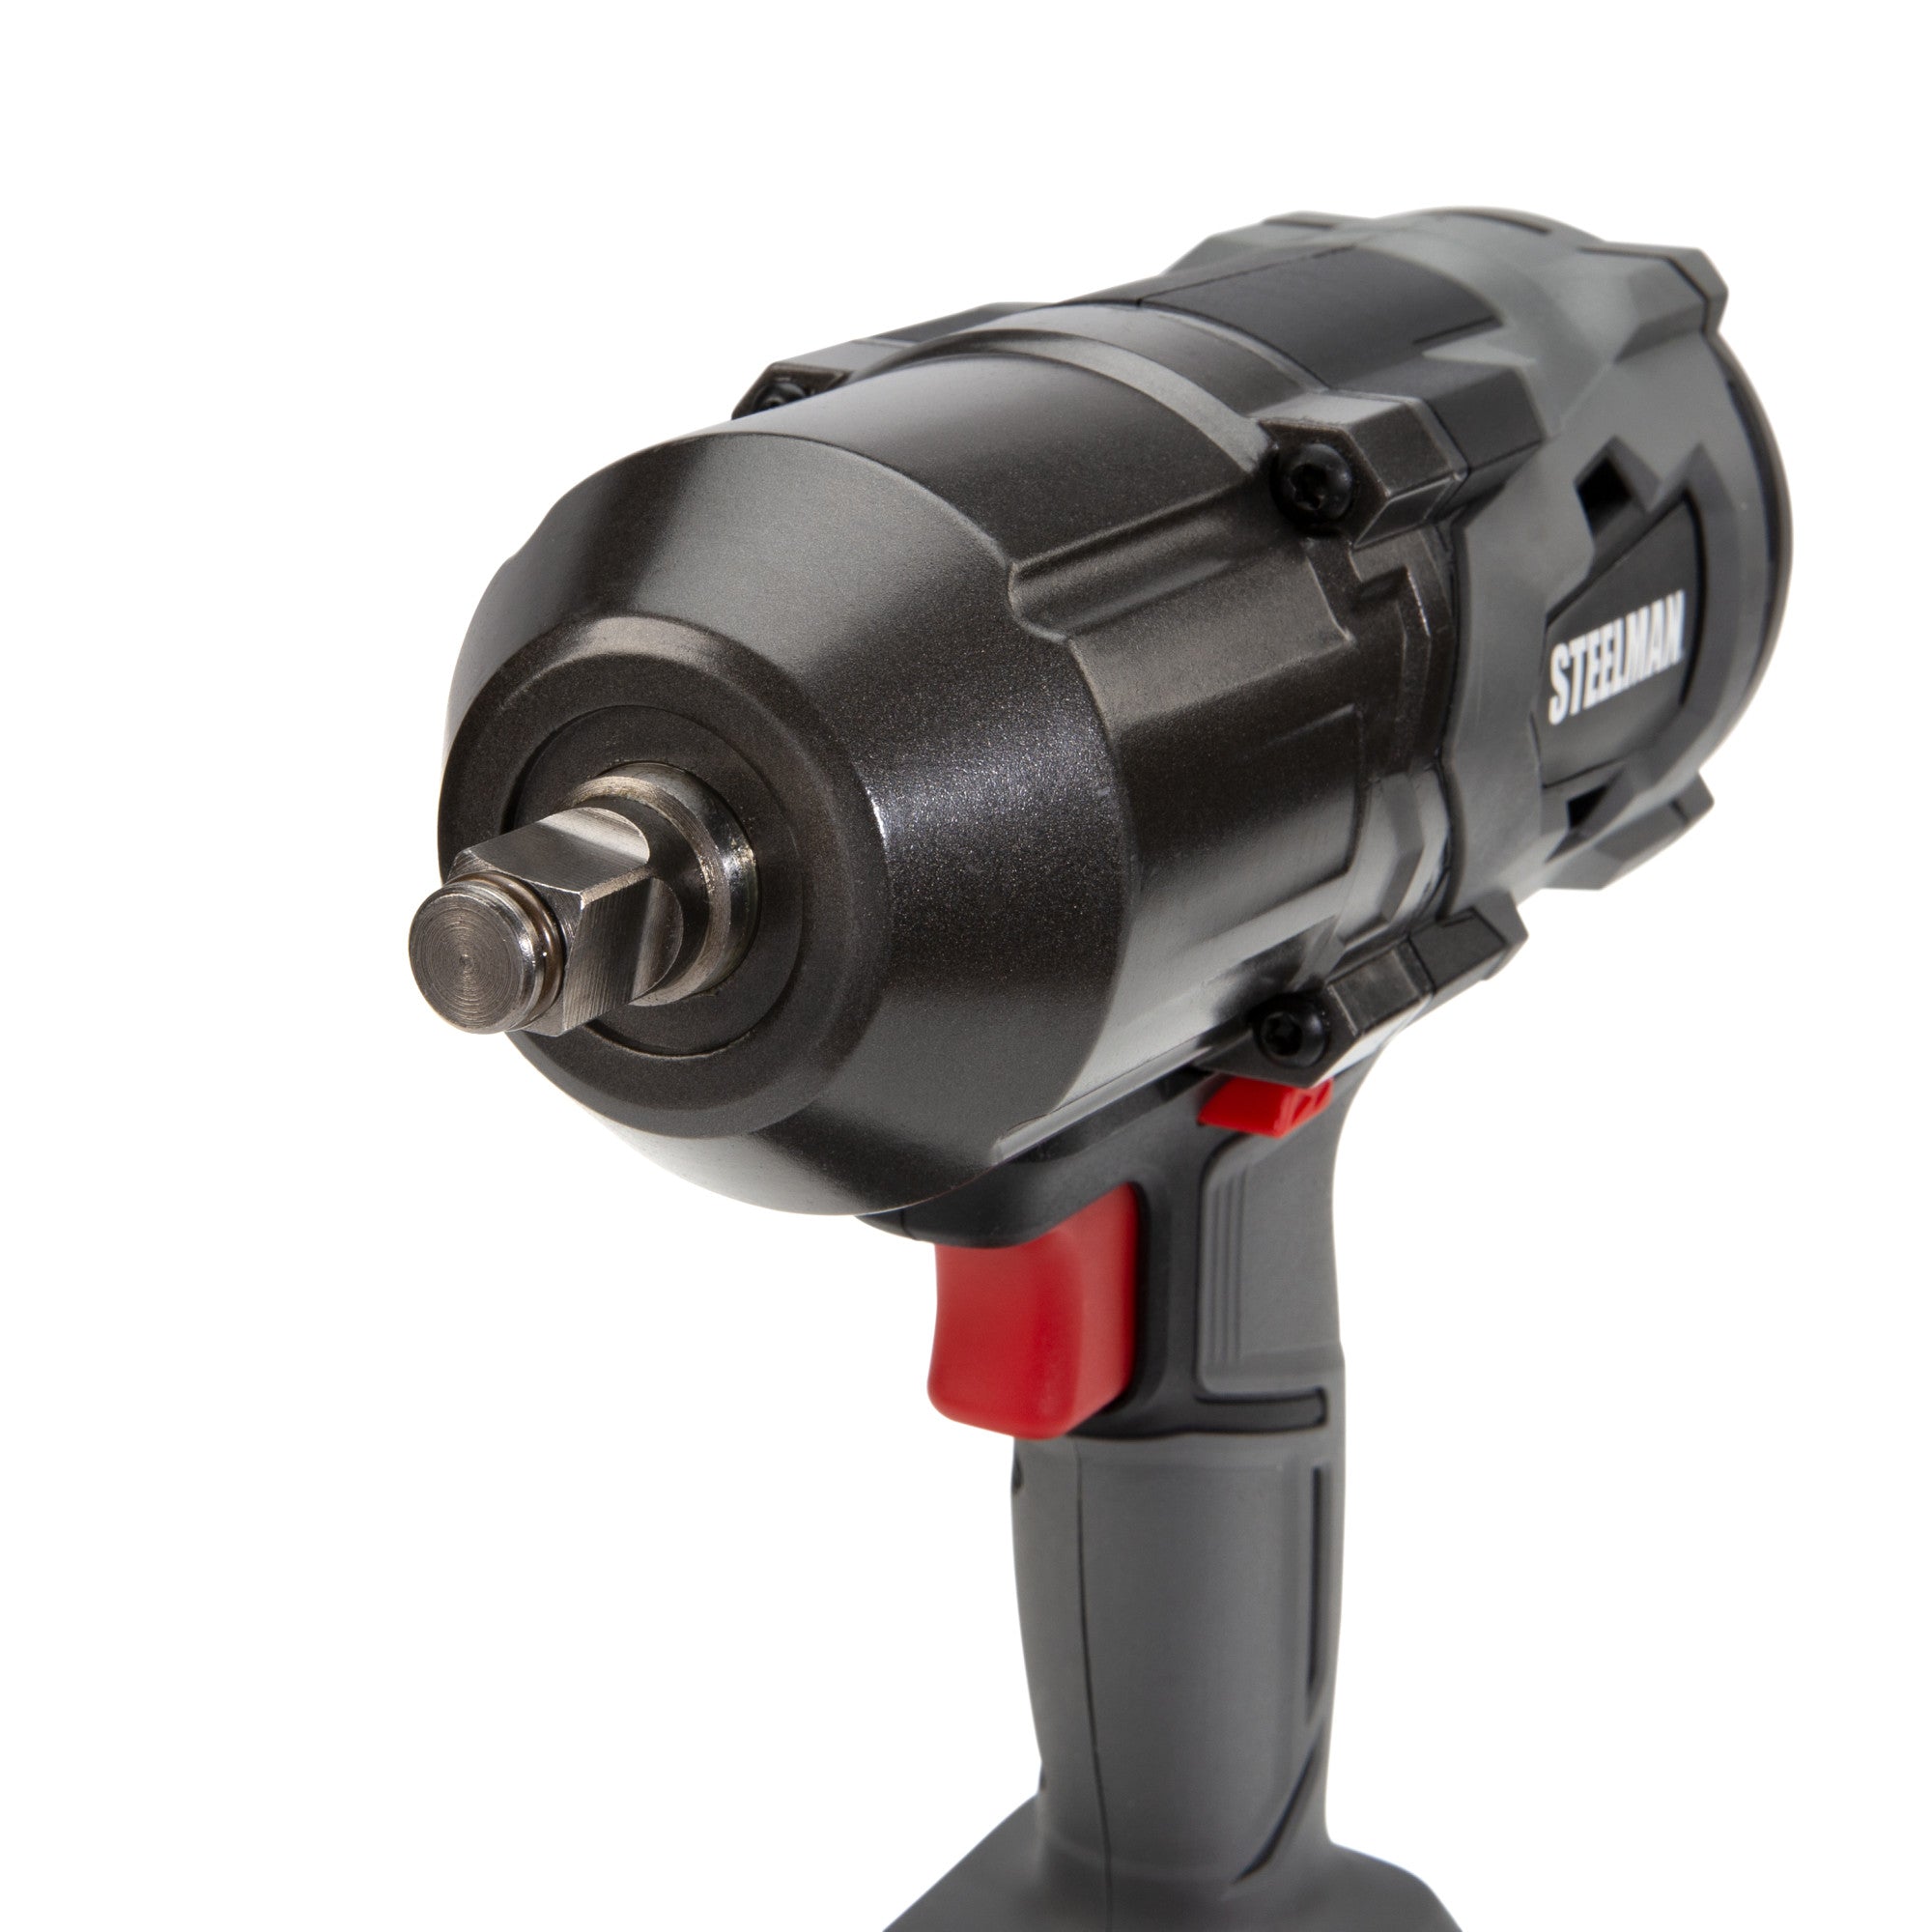 Steelman 20V Cordless 1/2-Inch Drive Brushless Impact Wrench And